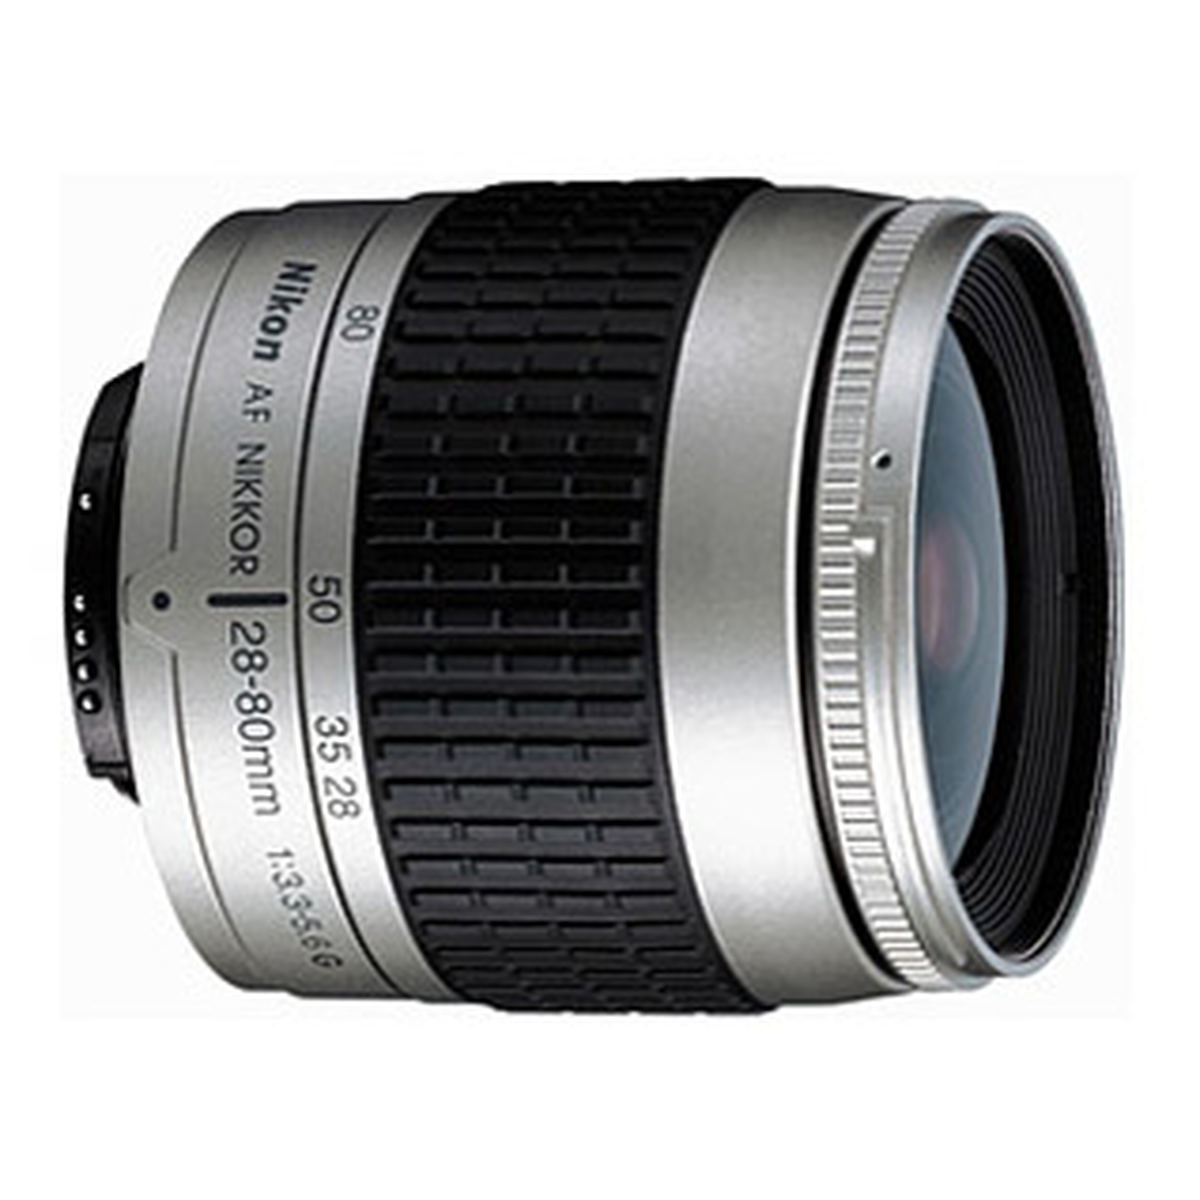 Nikon AF 28-80mm f/3.3-5.6G : Specifications and Opinions | JuzaPhoto